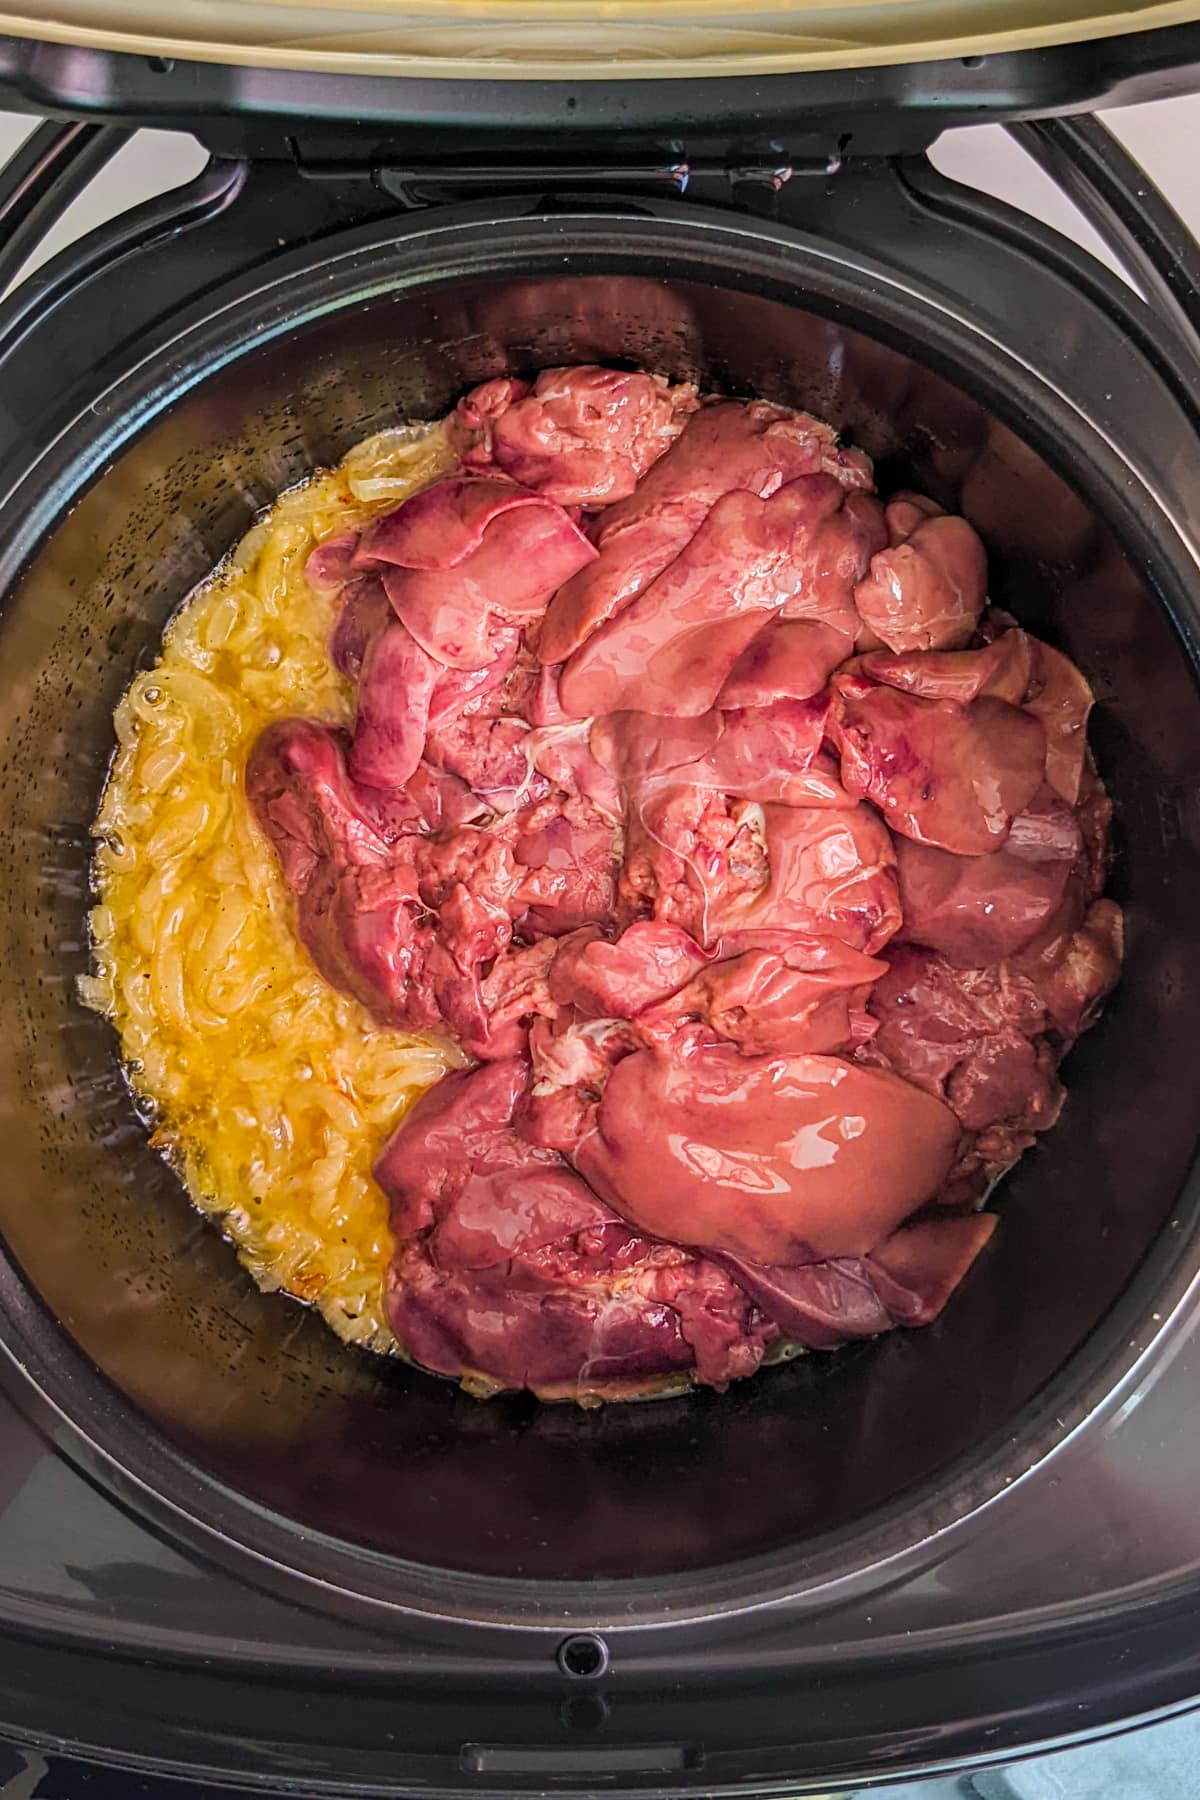 Top view of a slow cooker with caramelized onions and raw livers.